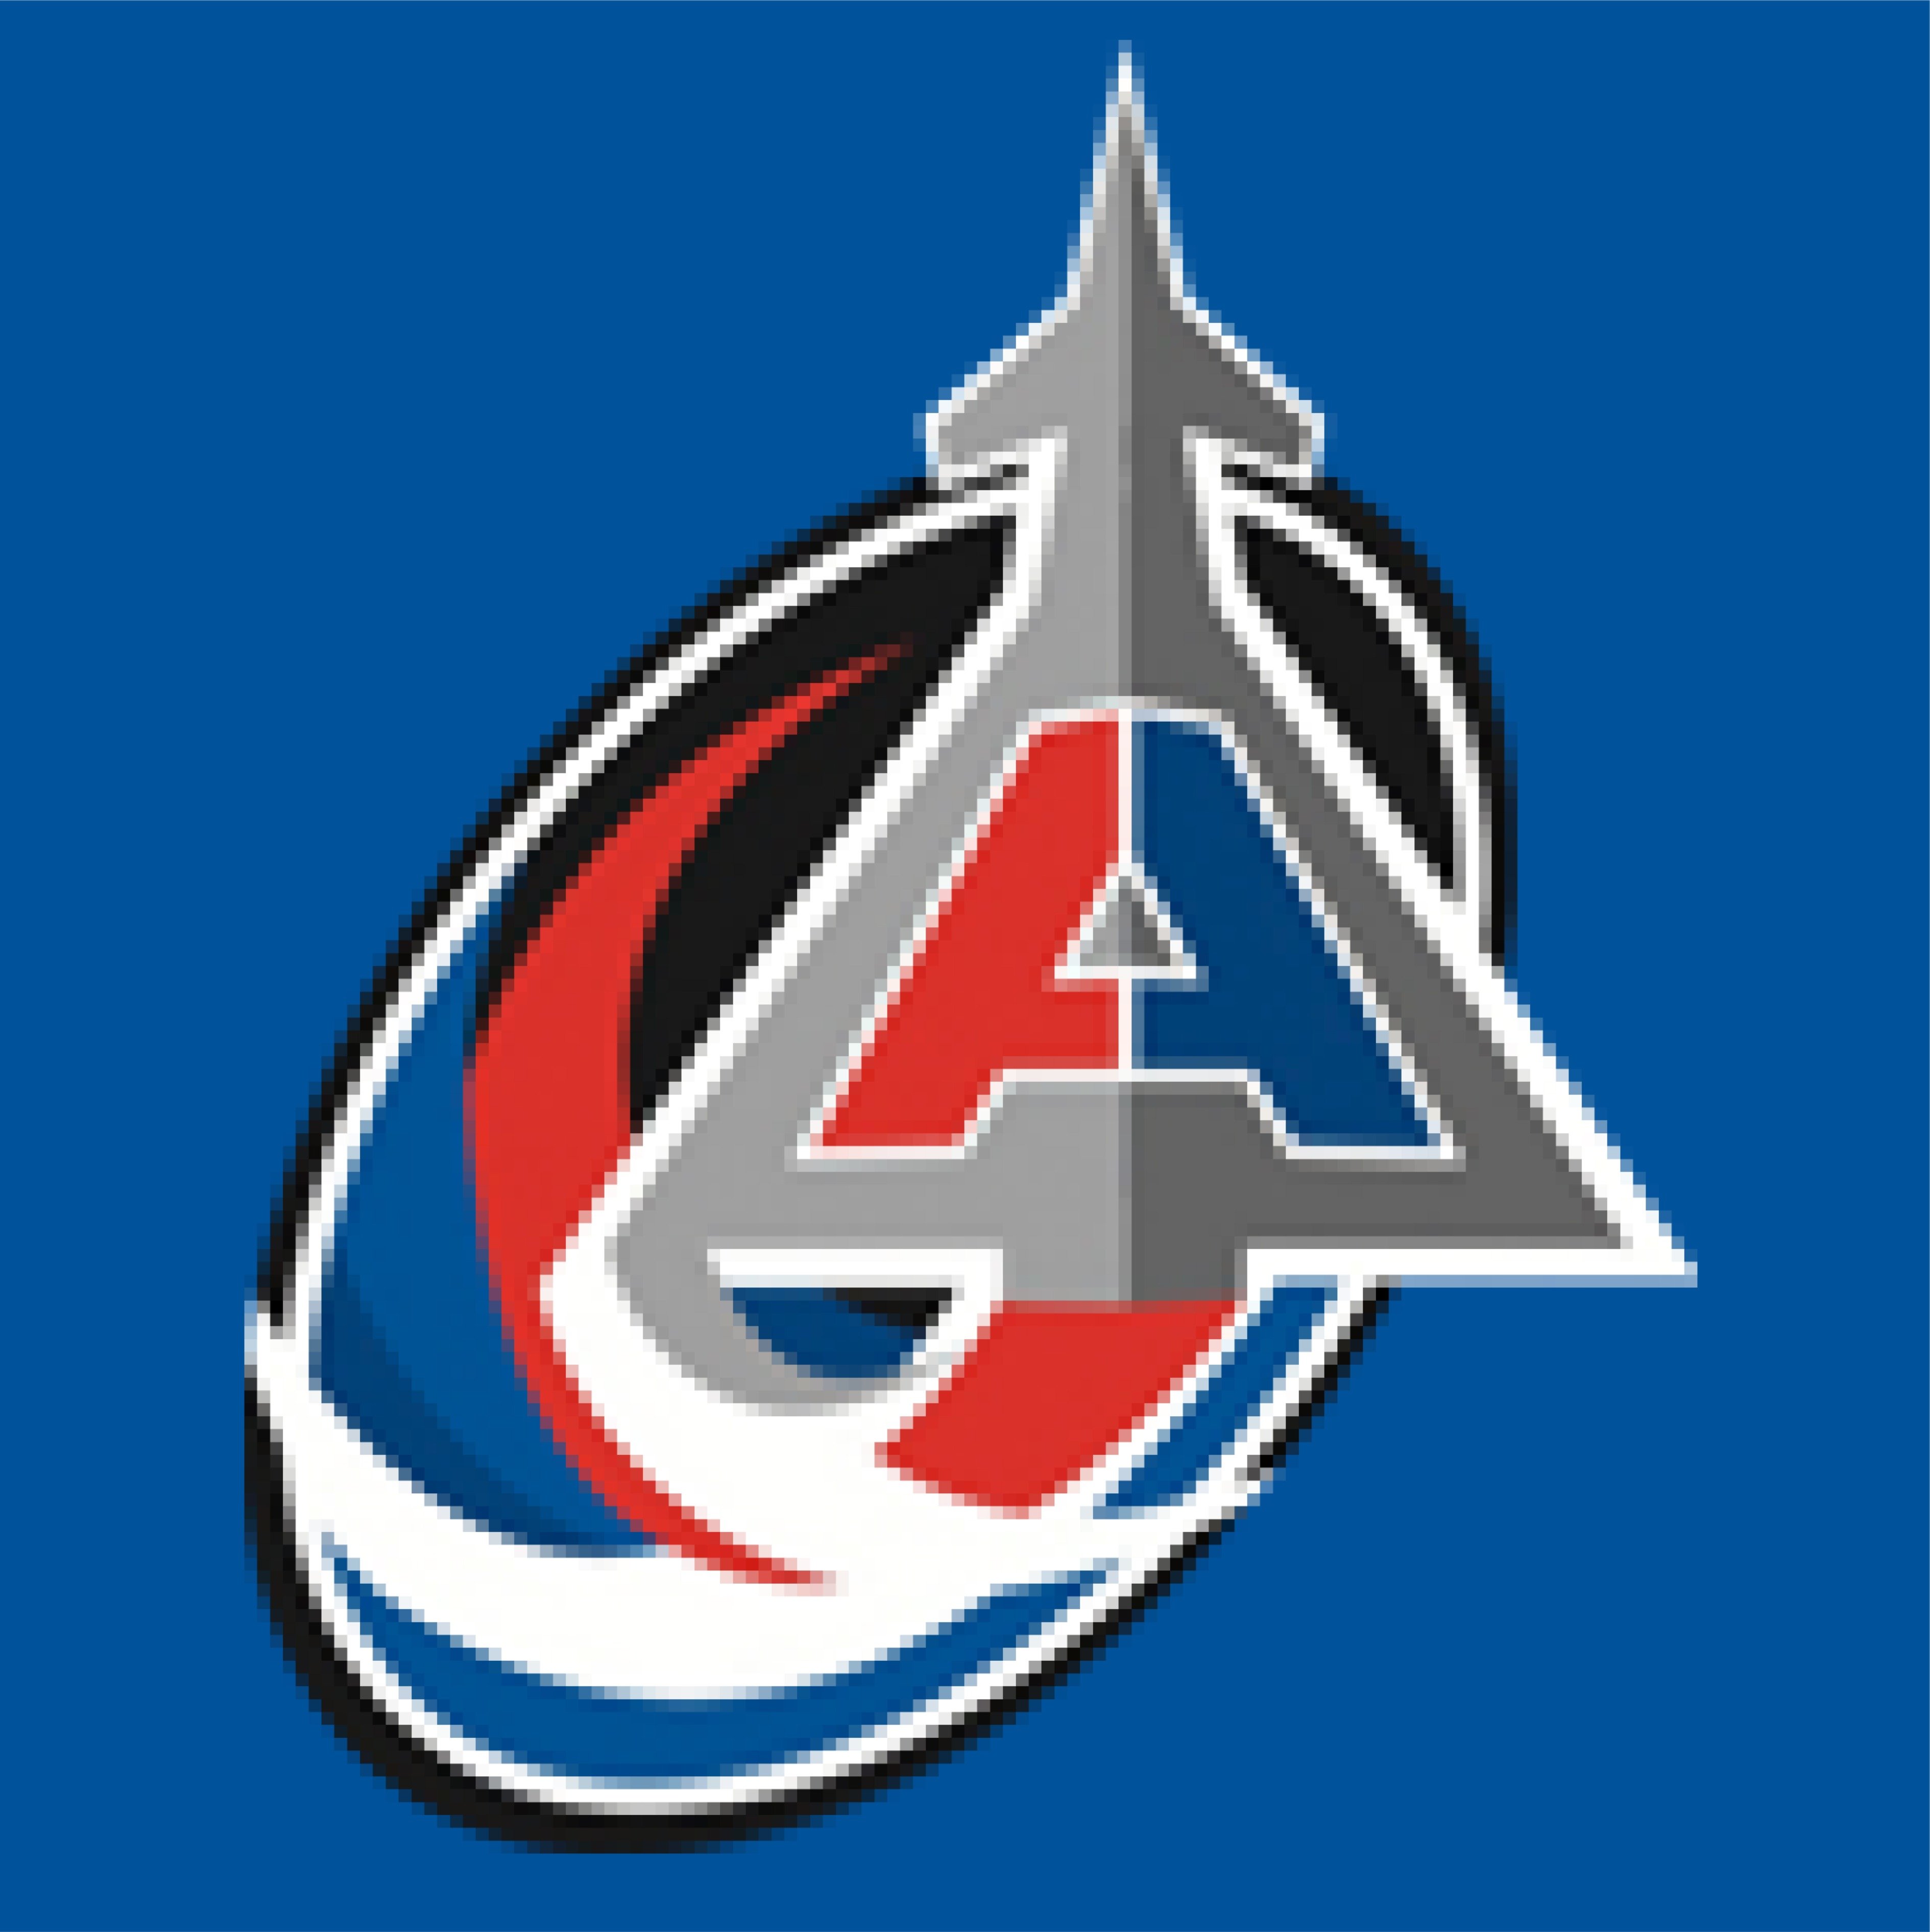 Official account of St Andrews Typhoons Ice Hockey - Champions of the world-renowned Wookey Game, and (self-proclaimed) best looking team in the UK. est. 2011